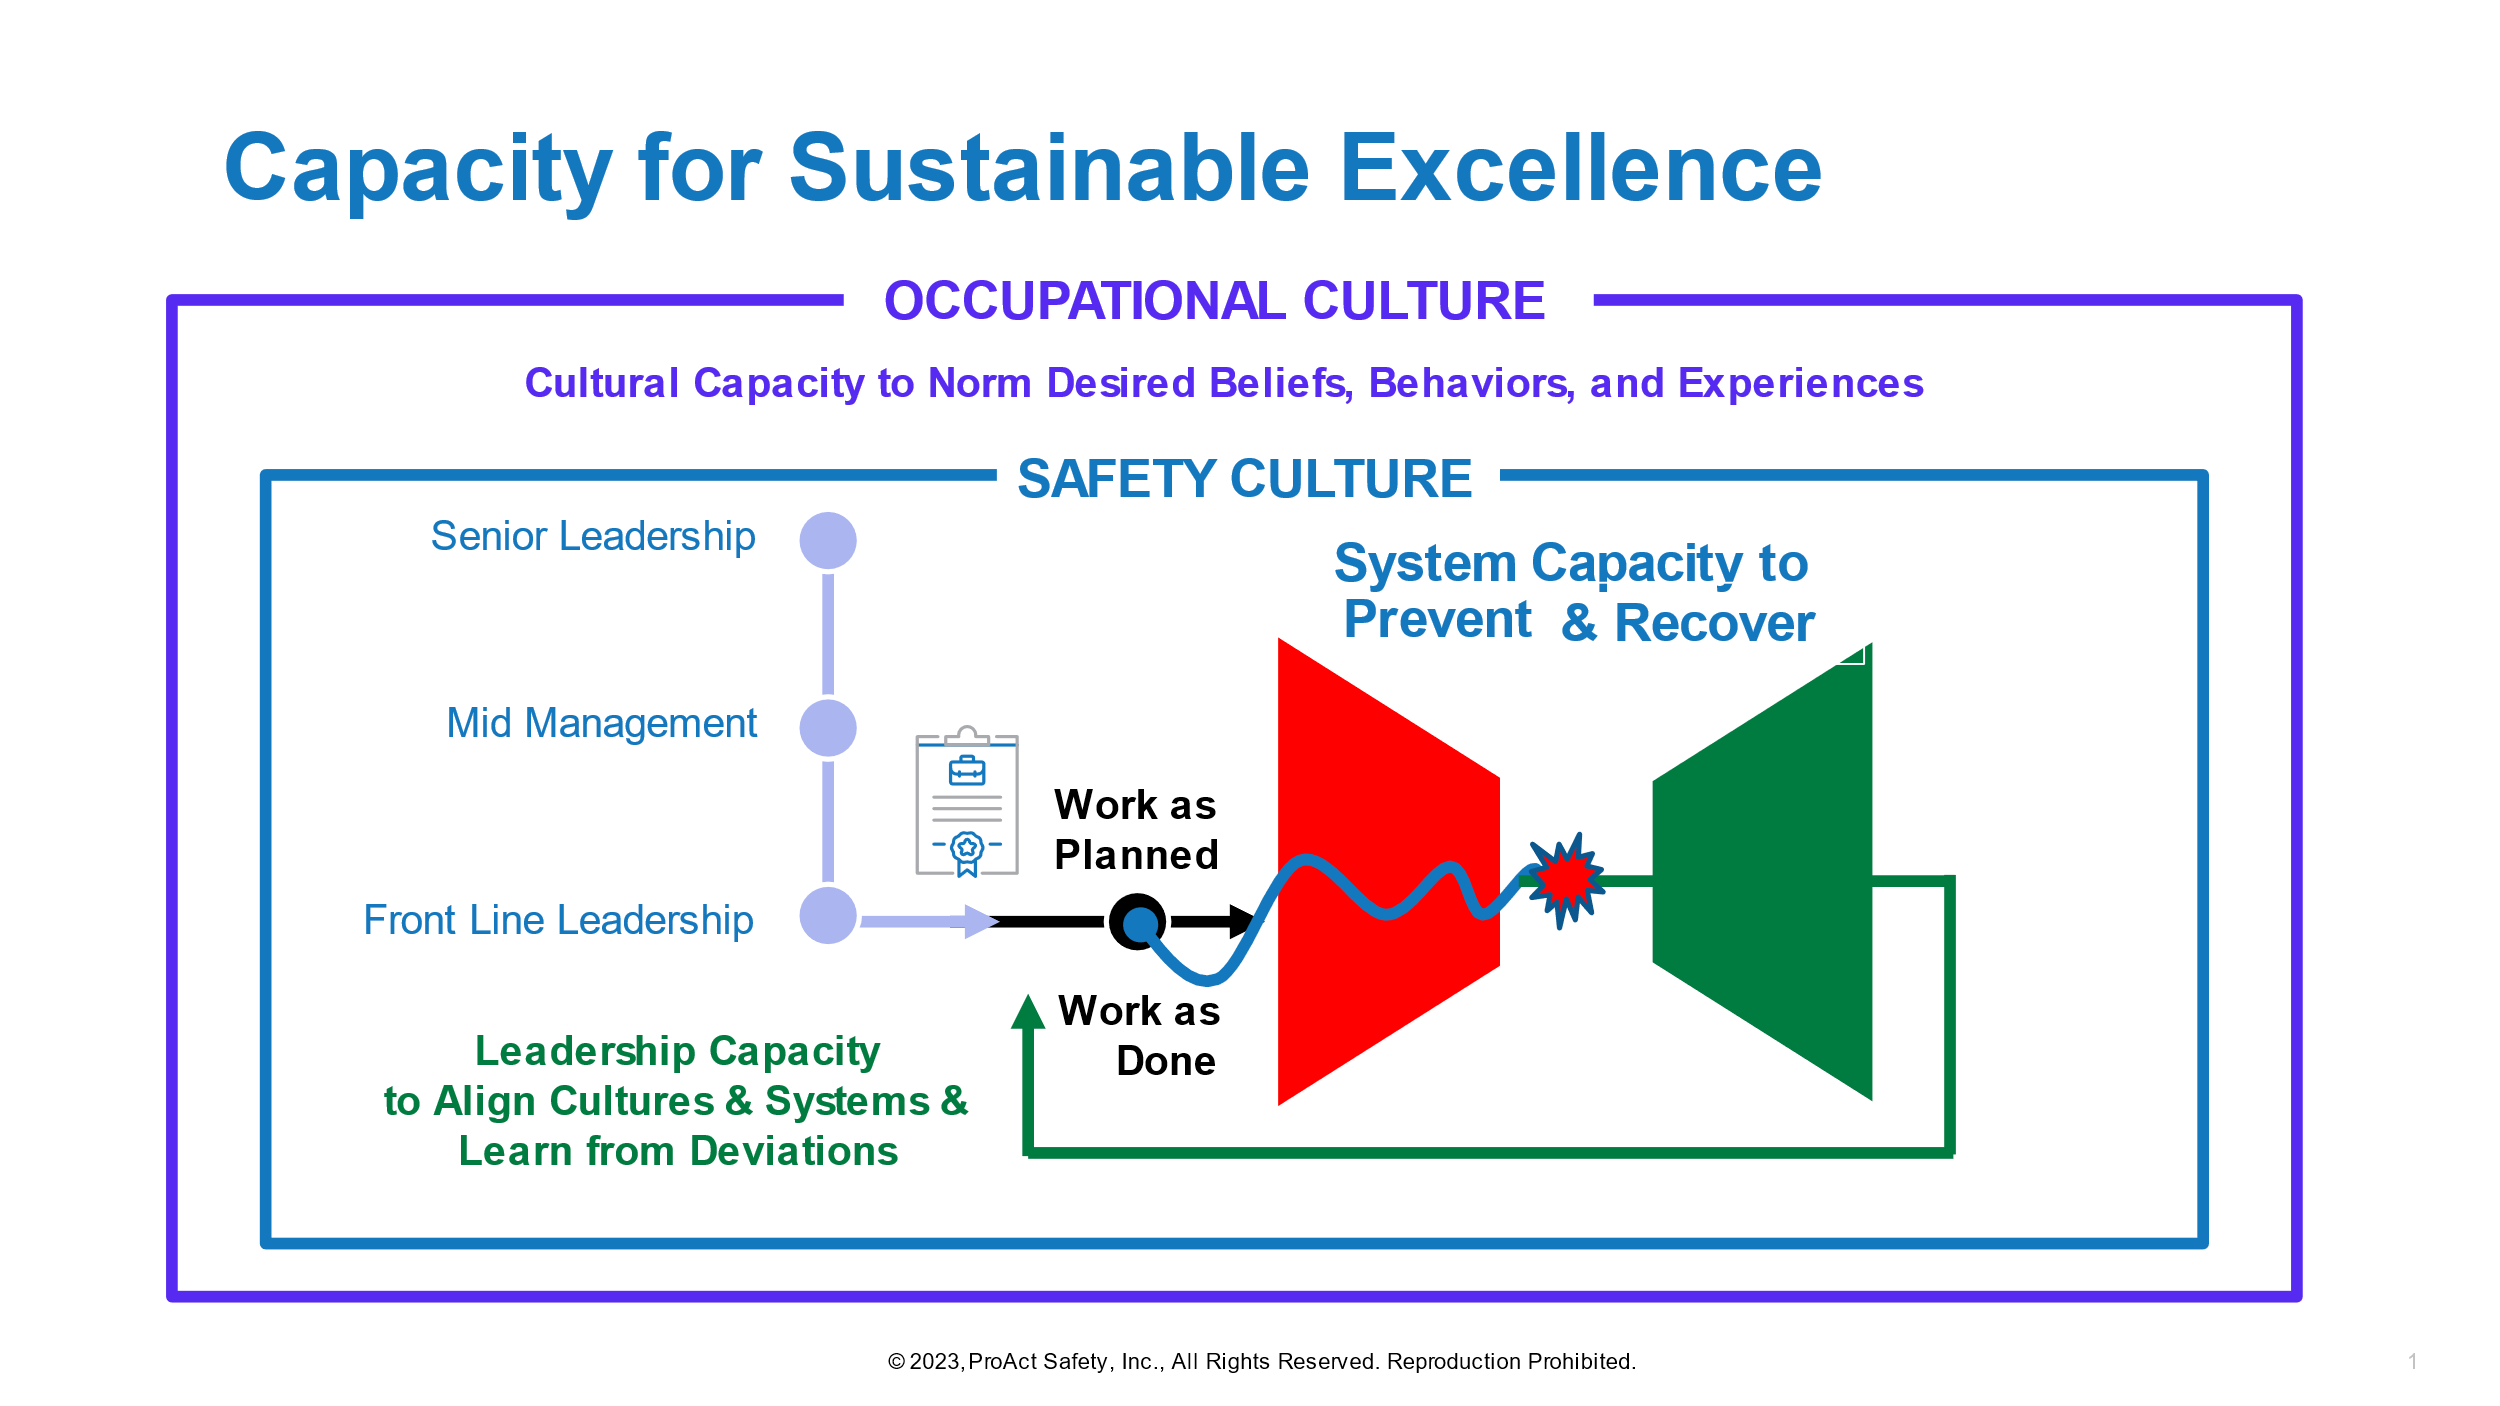 Figure: Capacity for Sustainable Excellence diagram